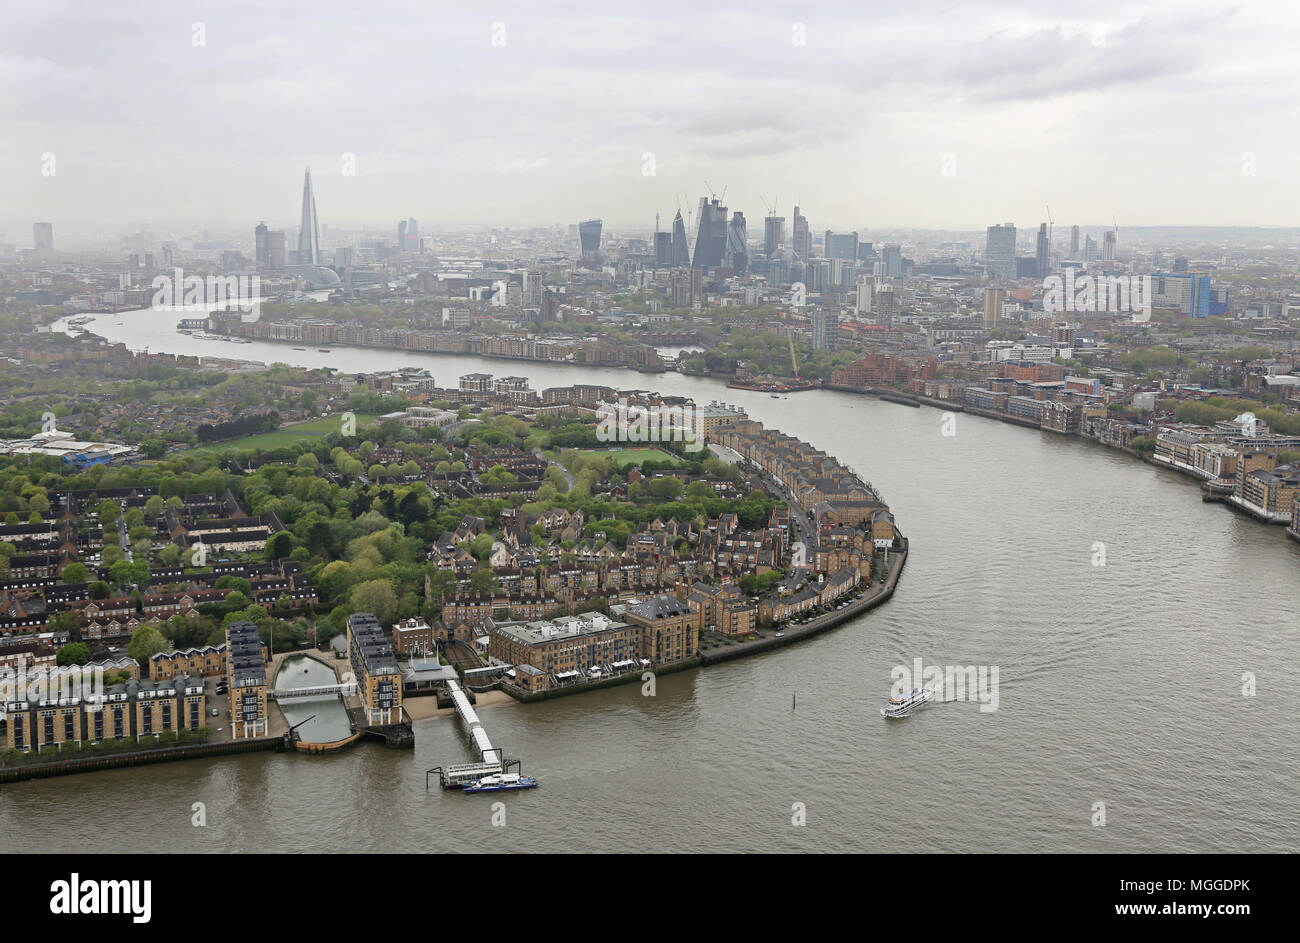 High level view of the River Thames from Canary Wharf, view west towards the City of London. Overcast April morning. Shows Rotherhithe in foreground. Stock Photo